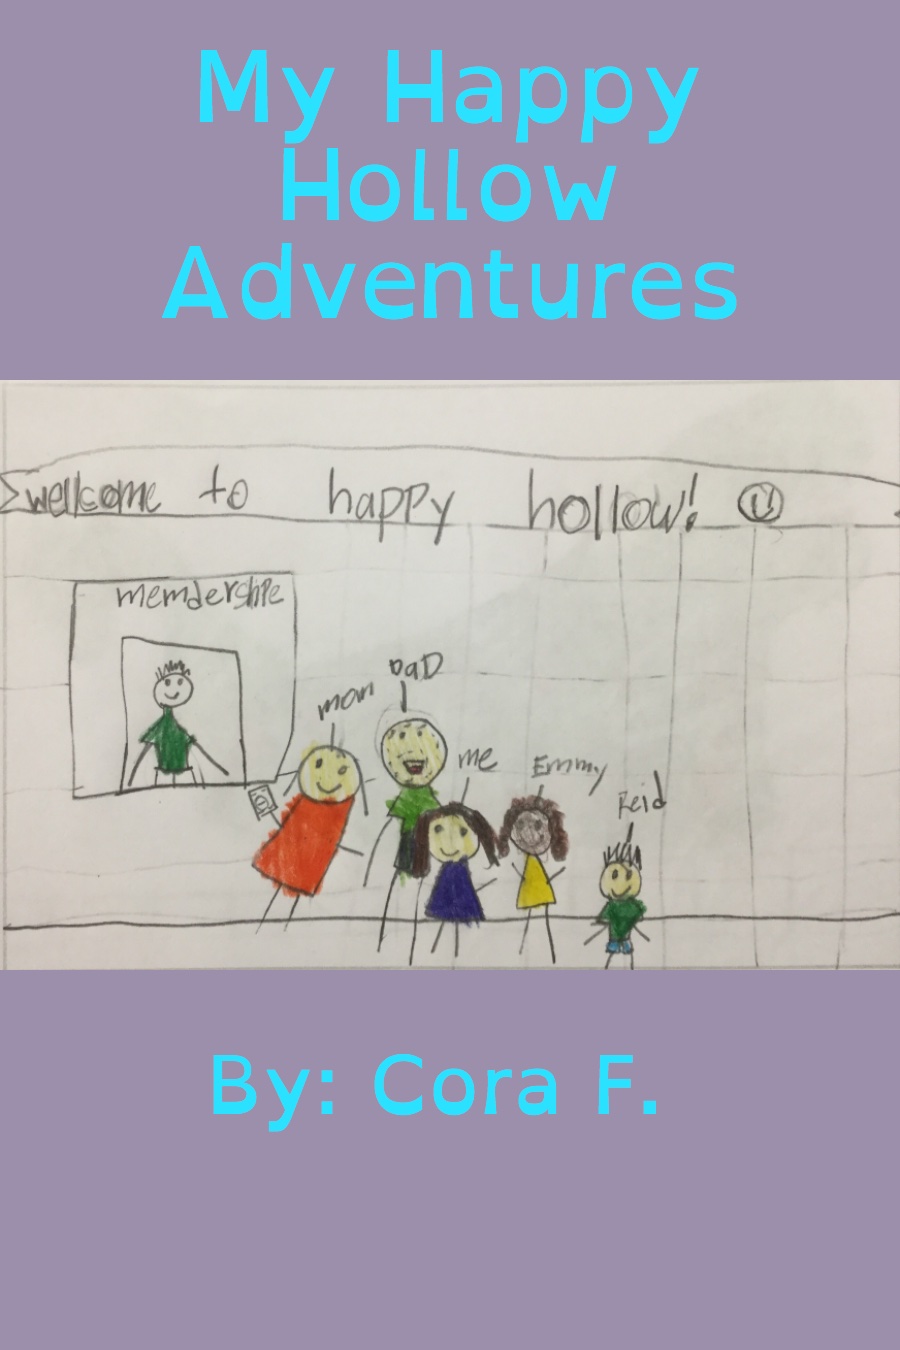 My Happy Hollow Adventure by Cora F (1)